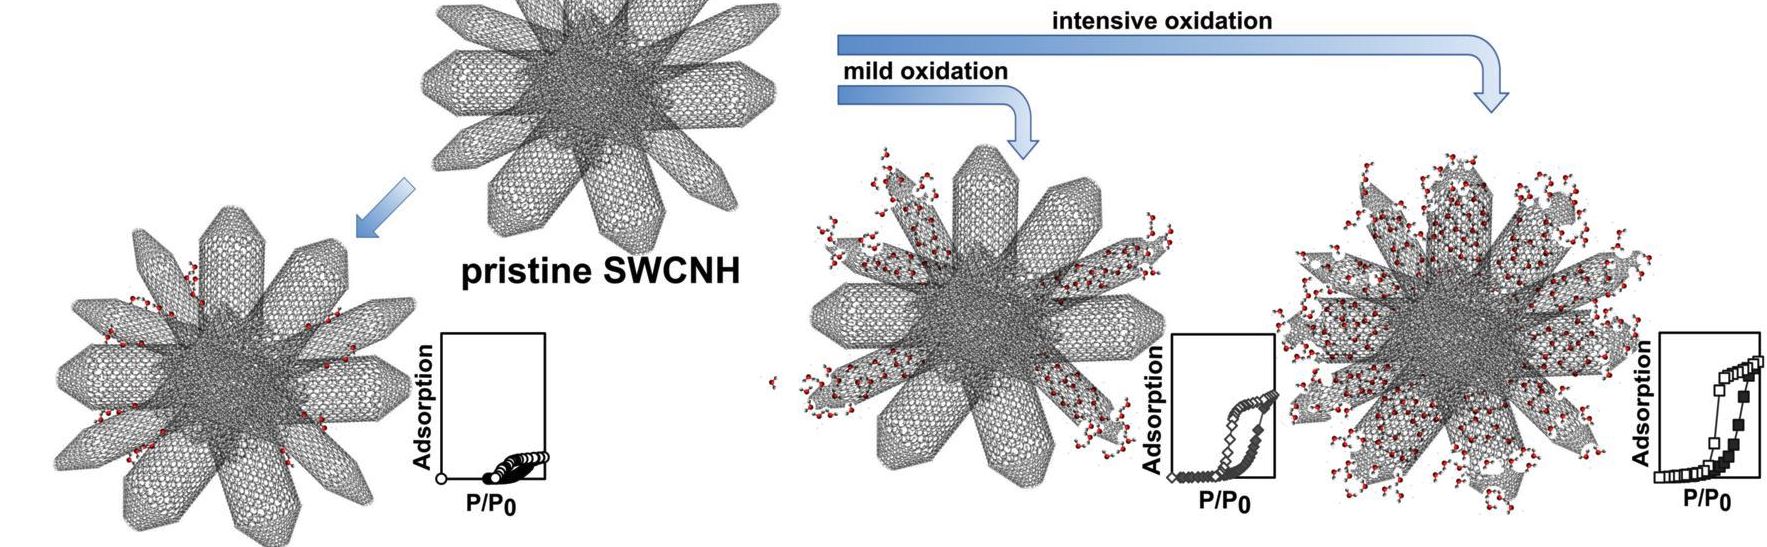 Water Adsorption Model in a Single Wall Carbon Nanohorn